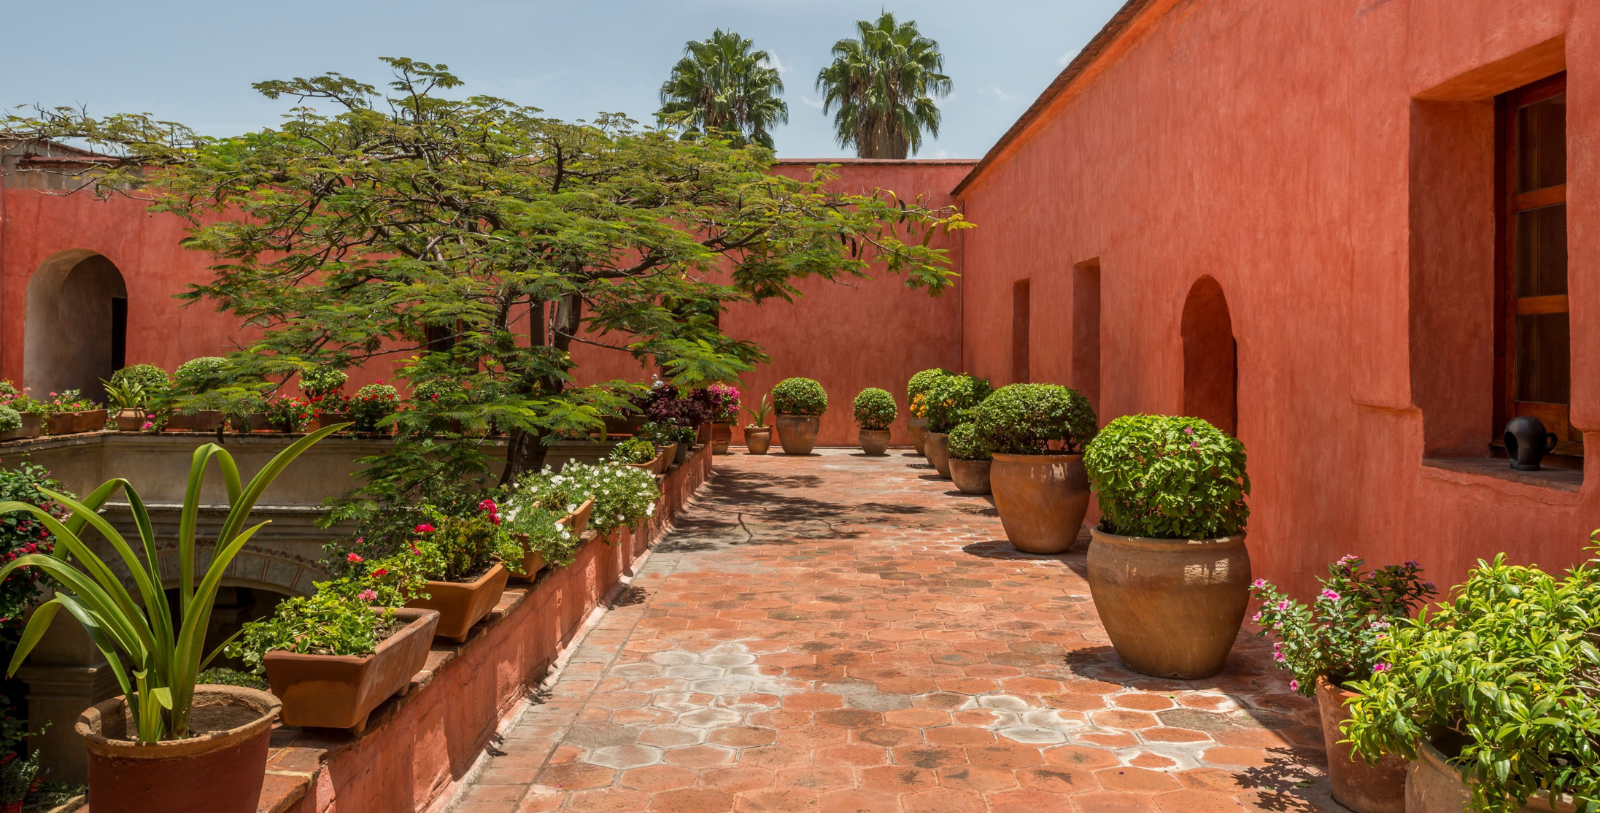 Image of the Quinta Real Oaxaca, 1579, a member of Historic Hotels Worldwide since 2012